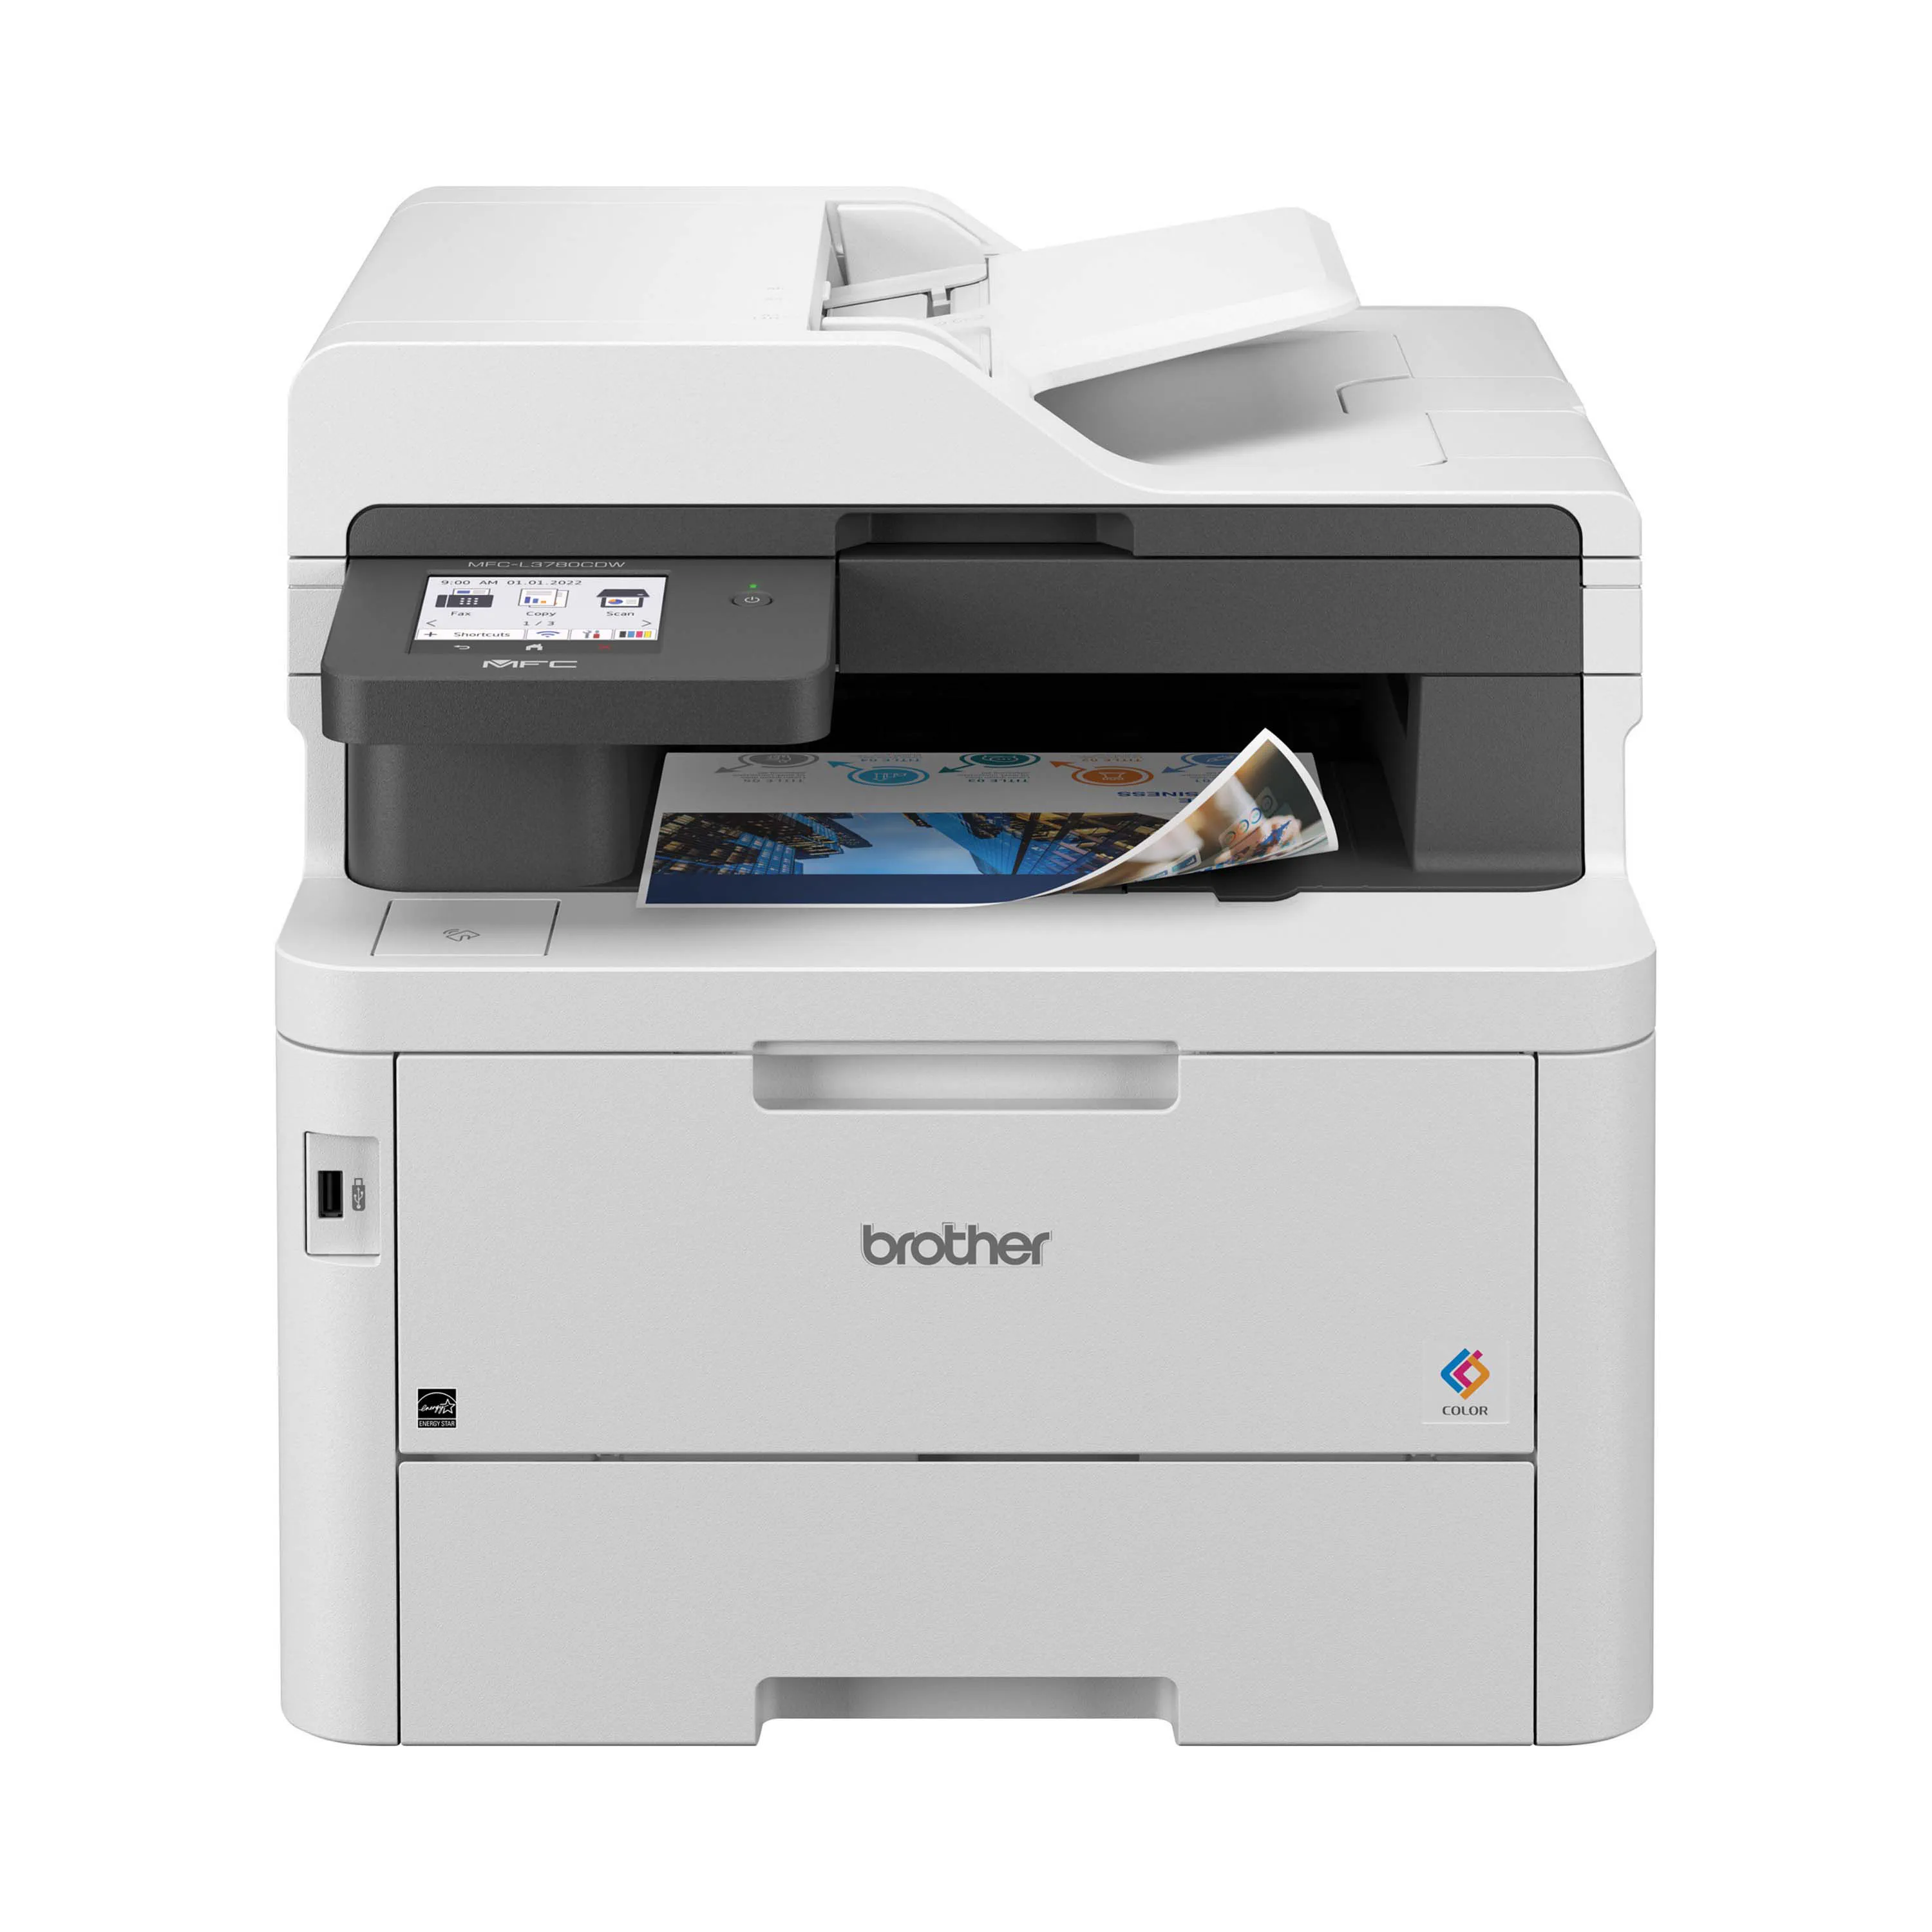 Laser printer Brother DCP-L2530DW - PS Auction - We value the future -  Largest in net auctions